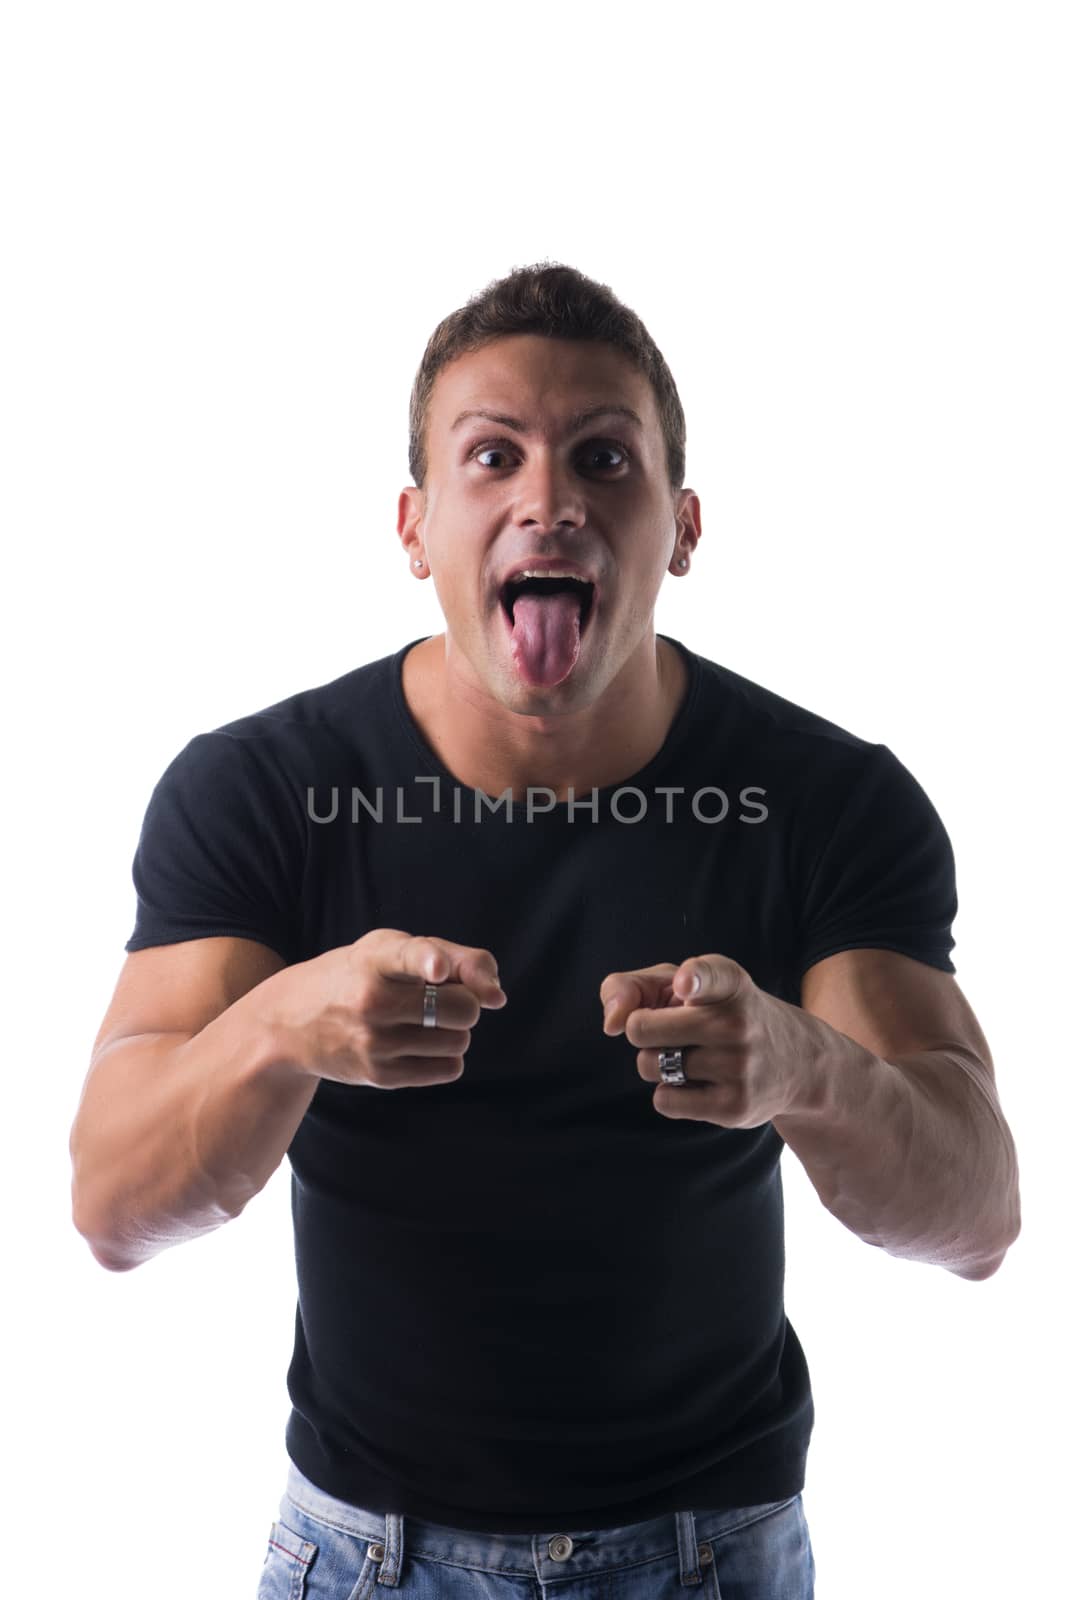 Close up Athletic Man in Black Shirt Showing Funny Facial Expression with Tongue Out While Pointing at Camera, Isolated on the Camera.